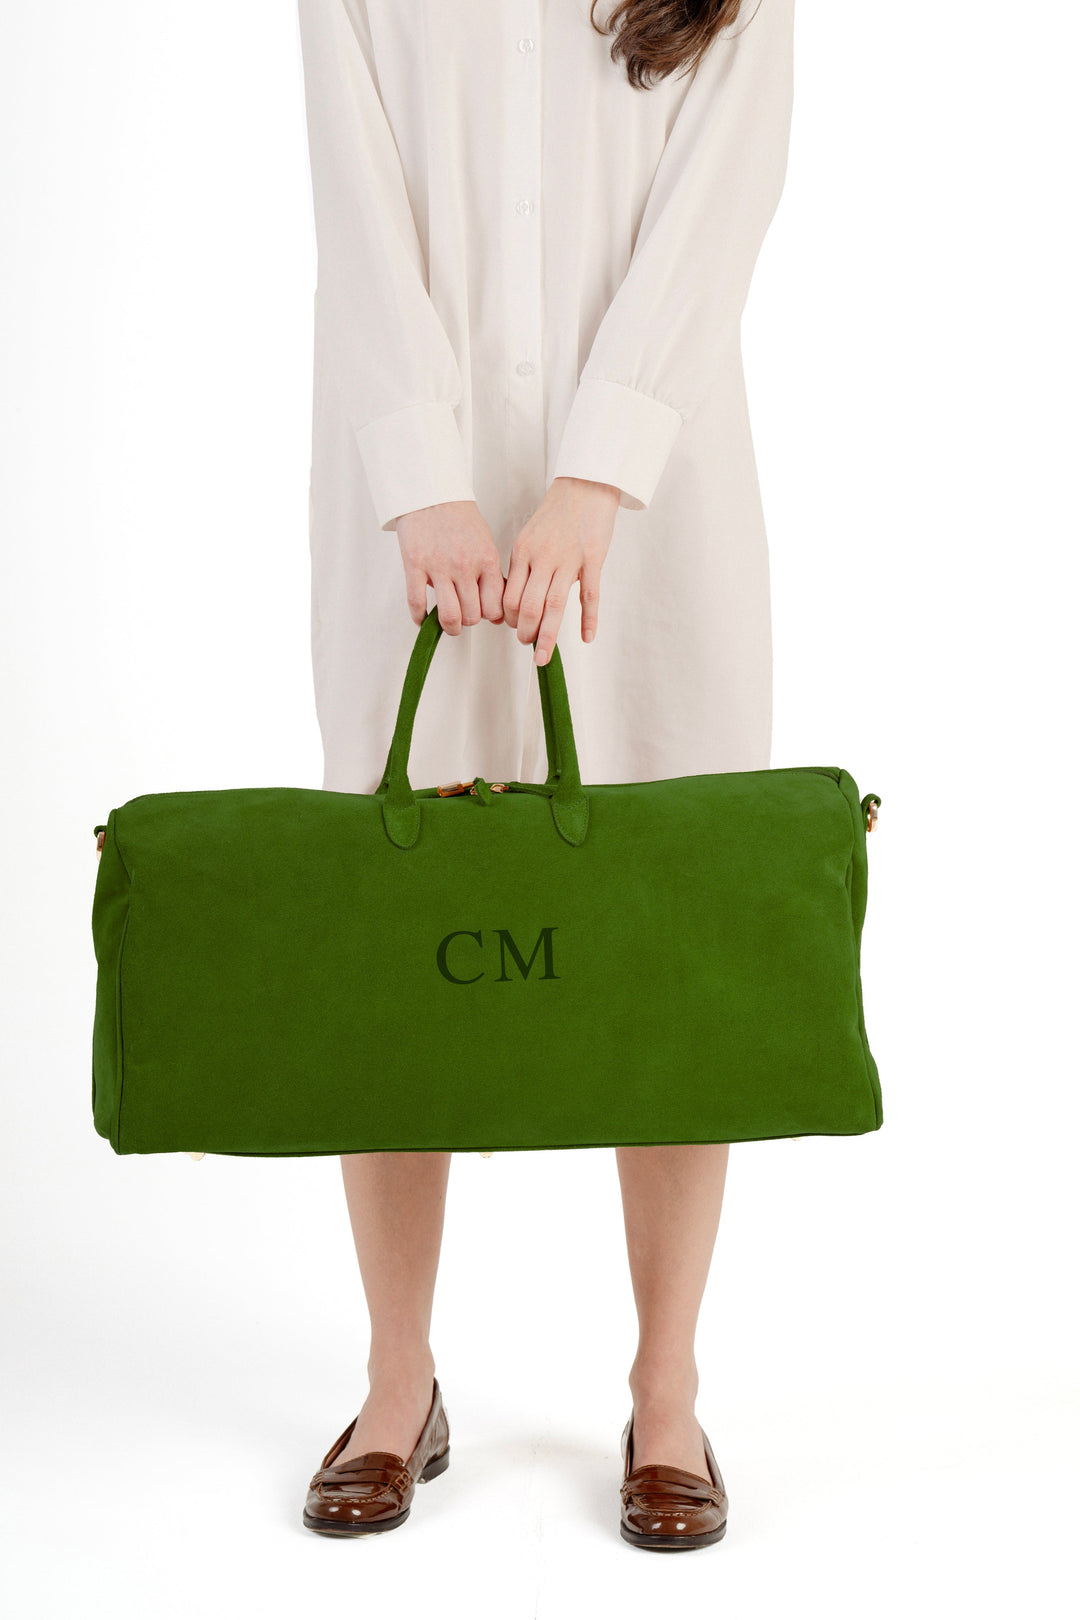 Woman holding large green monogrammed duffel bag against white background